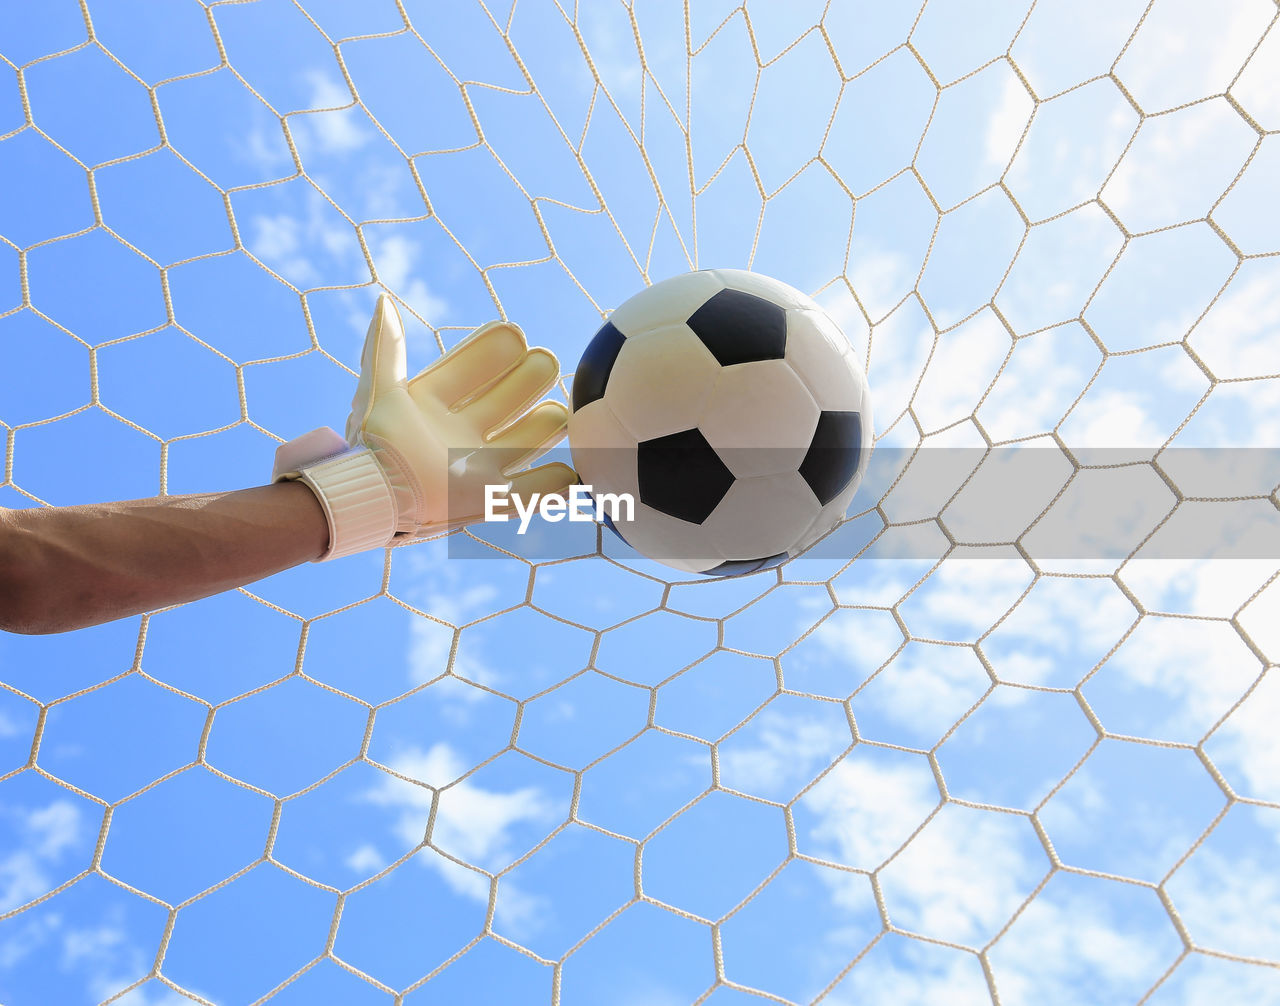 LOW ANGLE VIEW OF HAND PLAYING SOCCER BALL AGAINST BLUE SKY